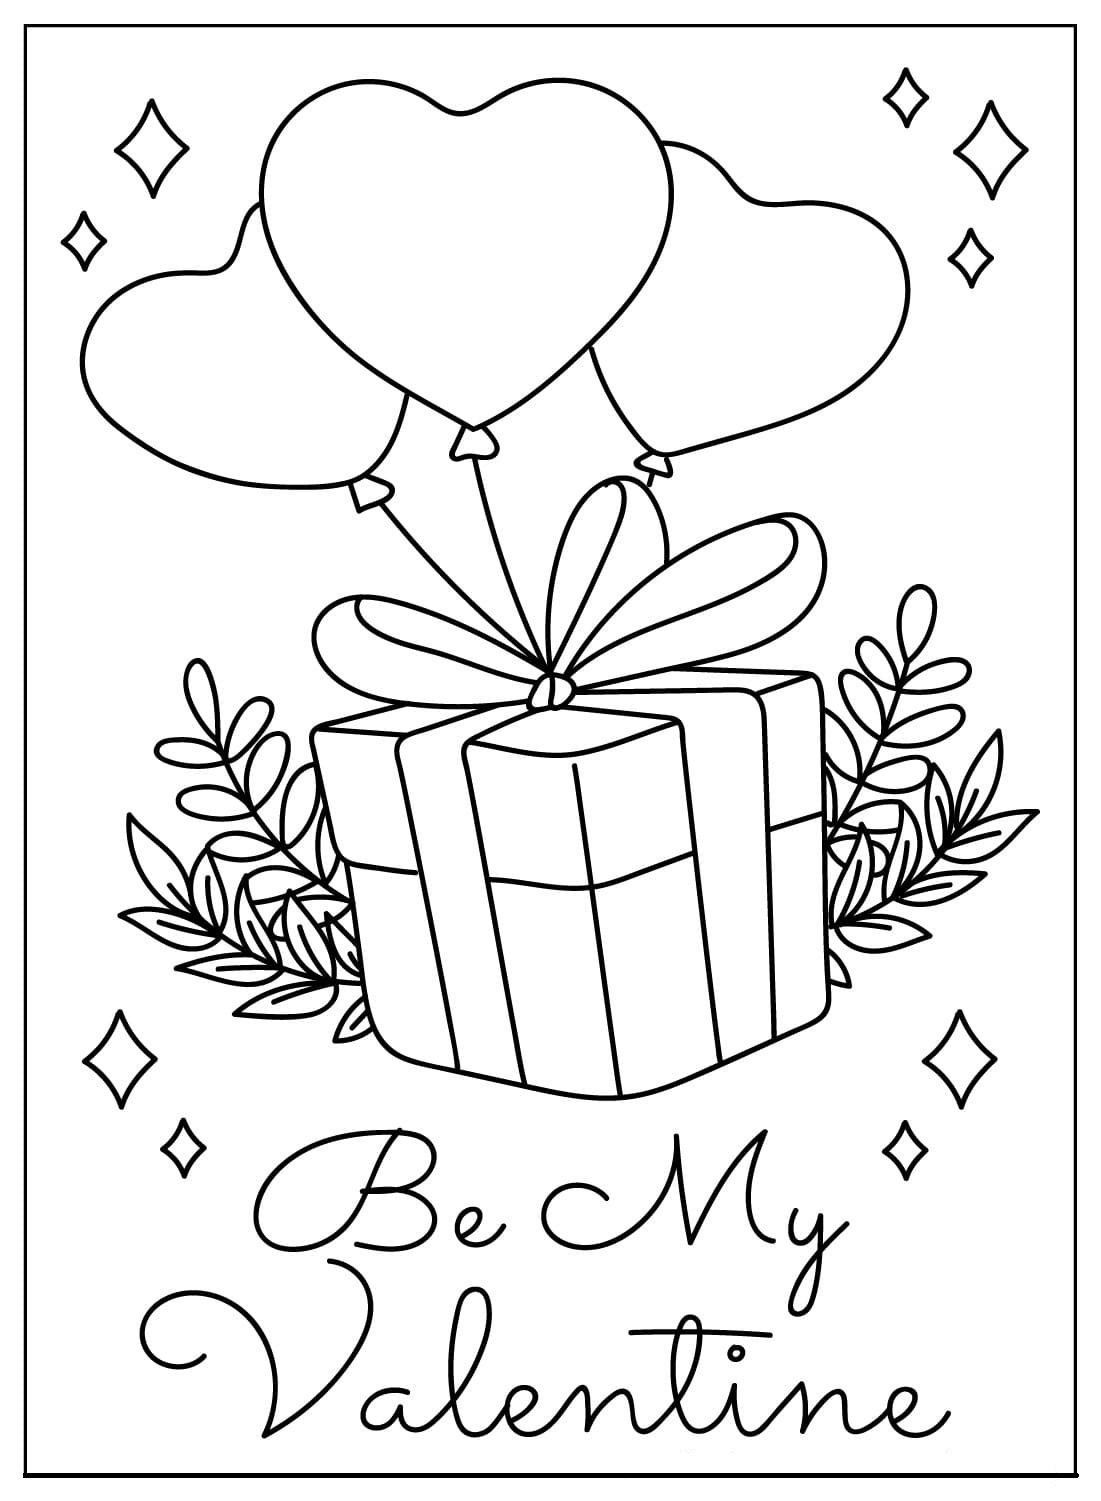 Free Printable Valentines Day Cards Coloring Page